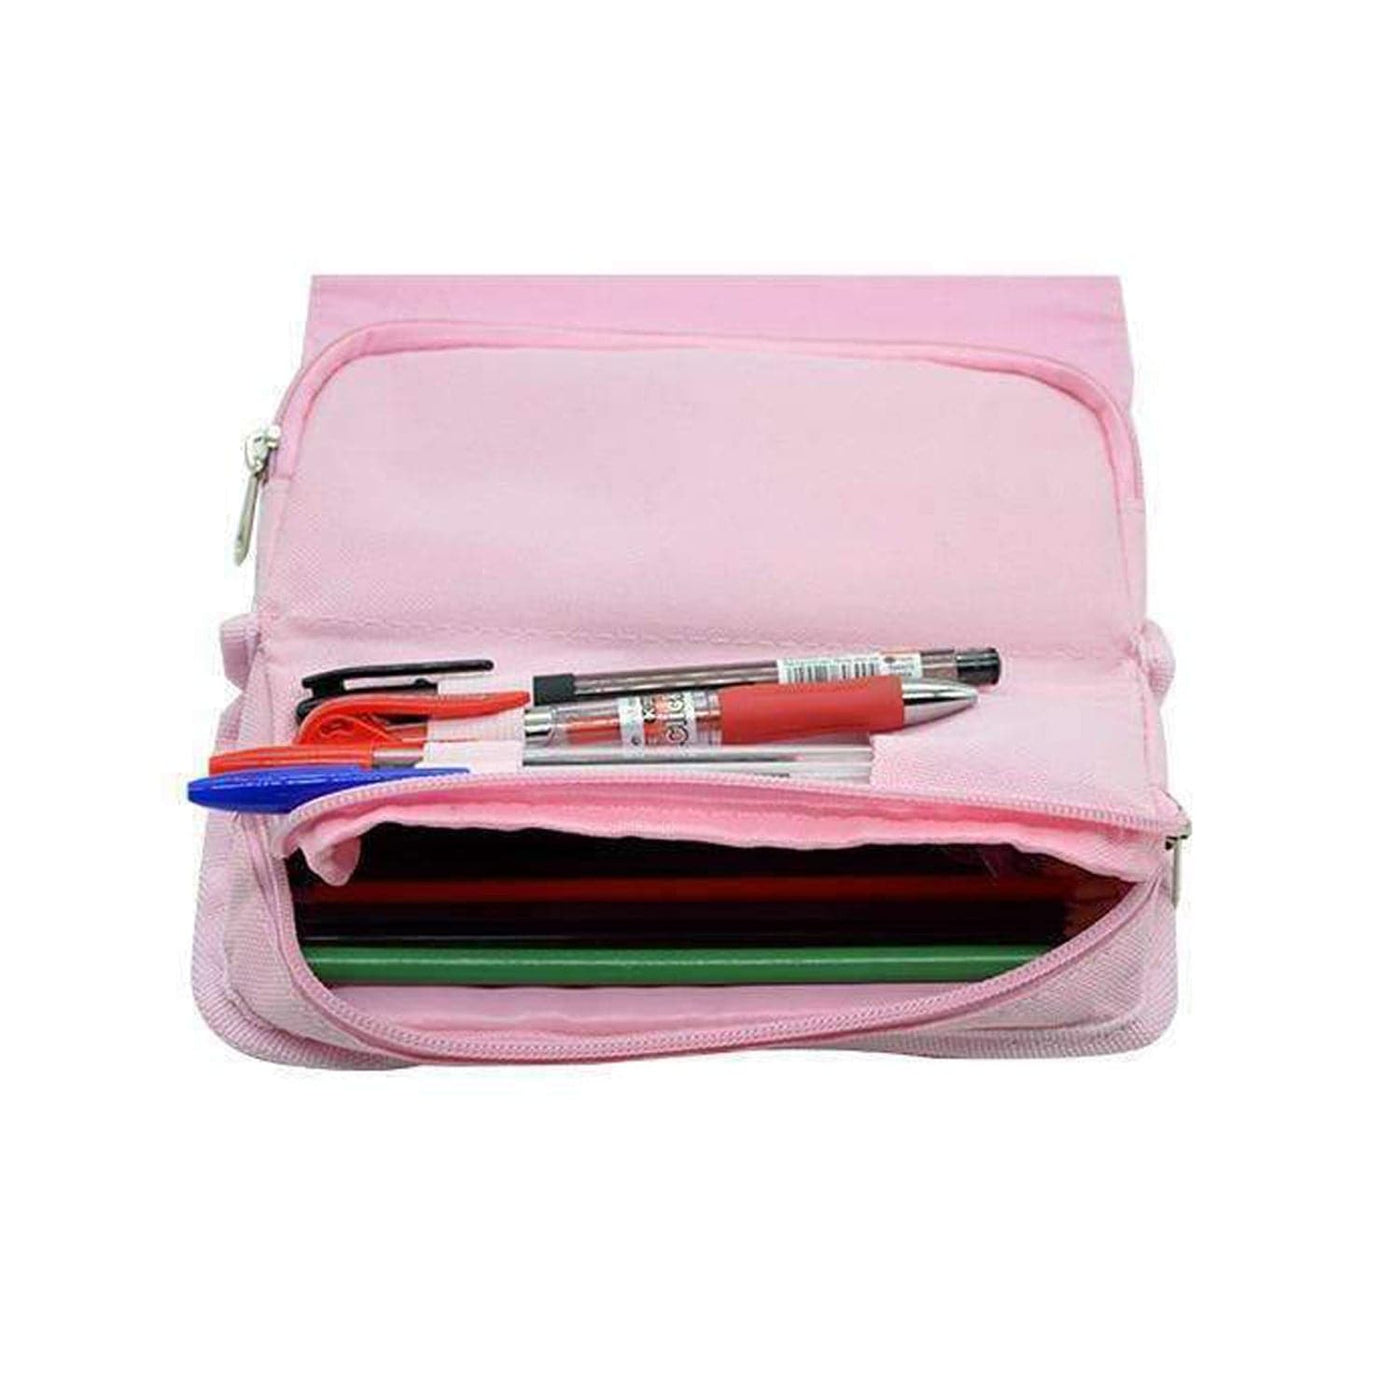 777 - Angel Numbers Pencil Case